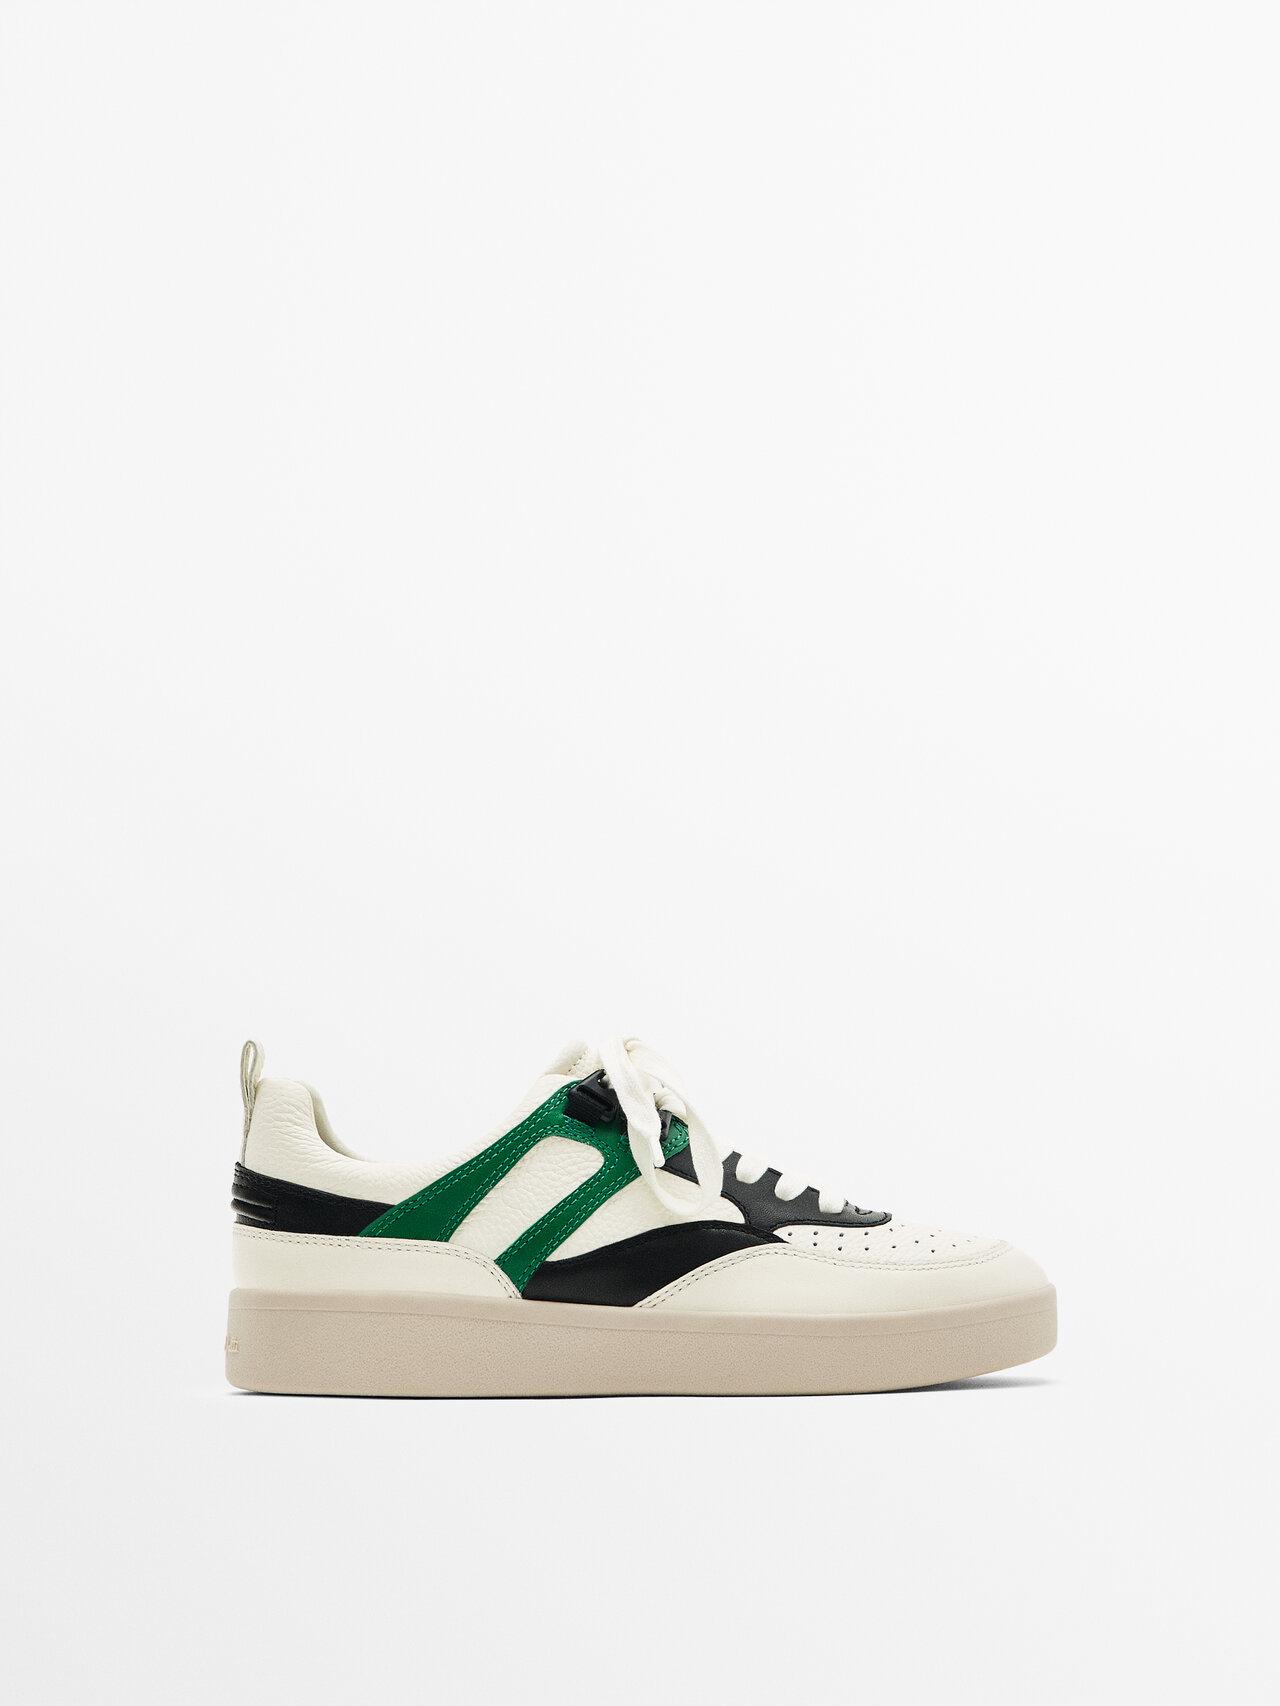 MASSIMO DUTTI Contrast Leather Trainers in White | Lyst